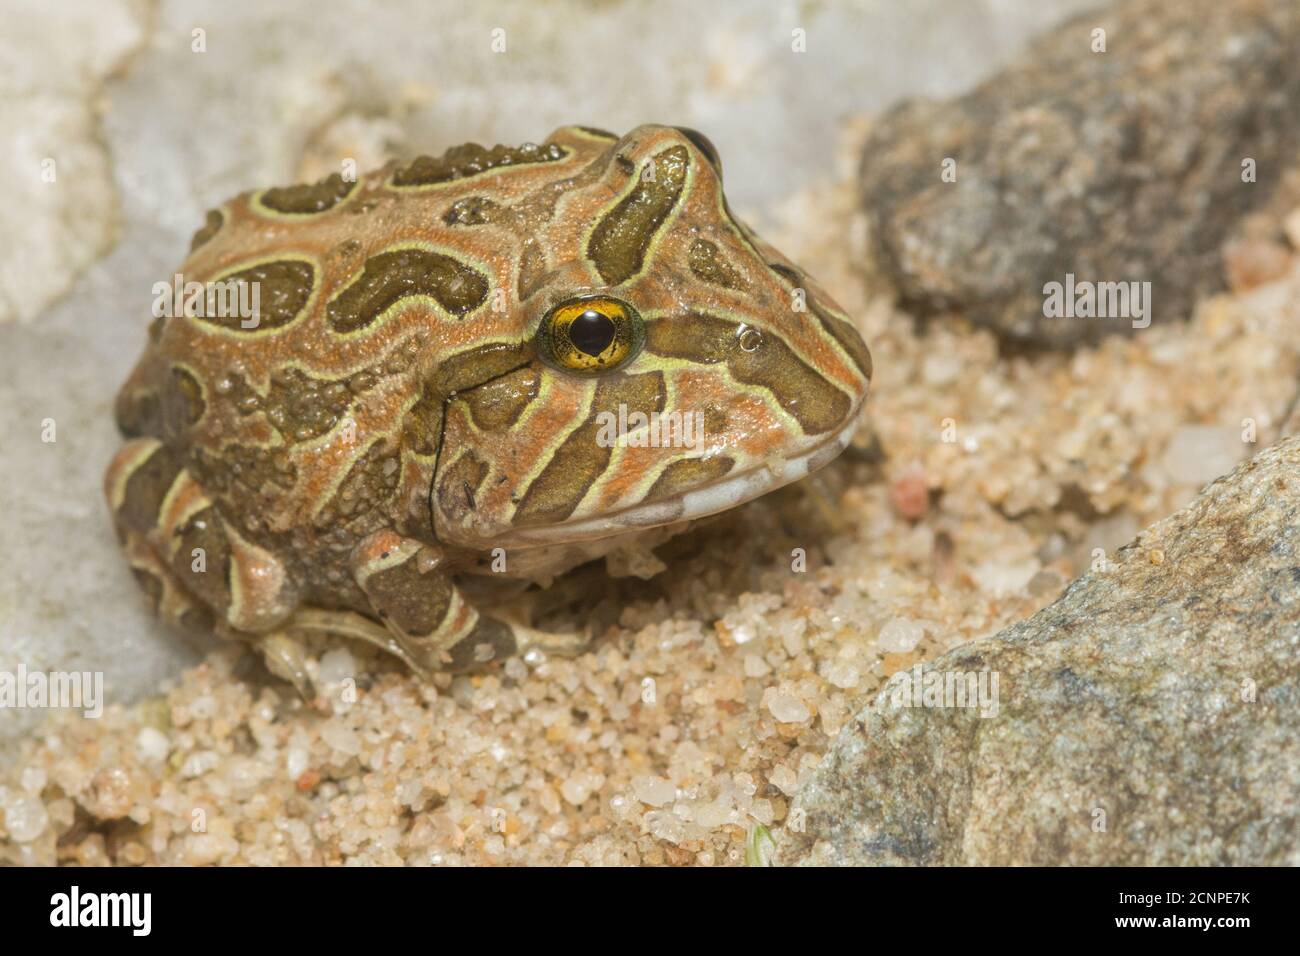 Froglets of the pacific horned frog (Ceratophrys stolzmanni) that recently metamorphized and are now small frogs. Stock Photo